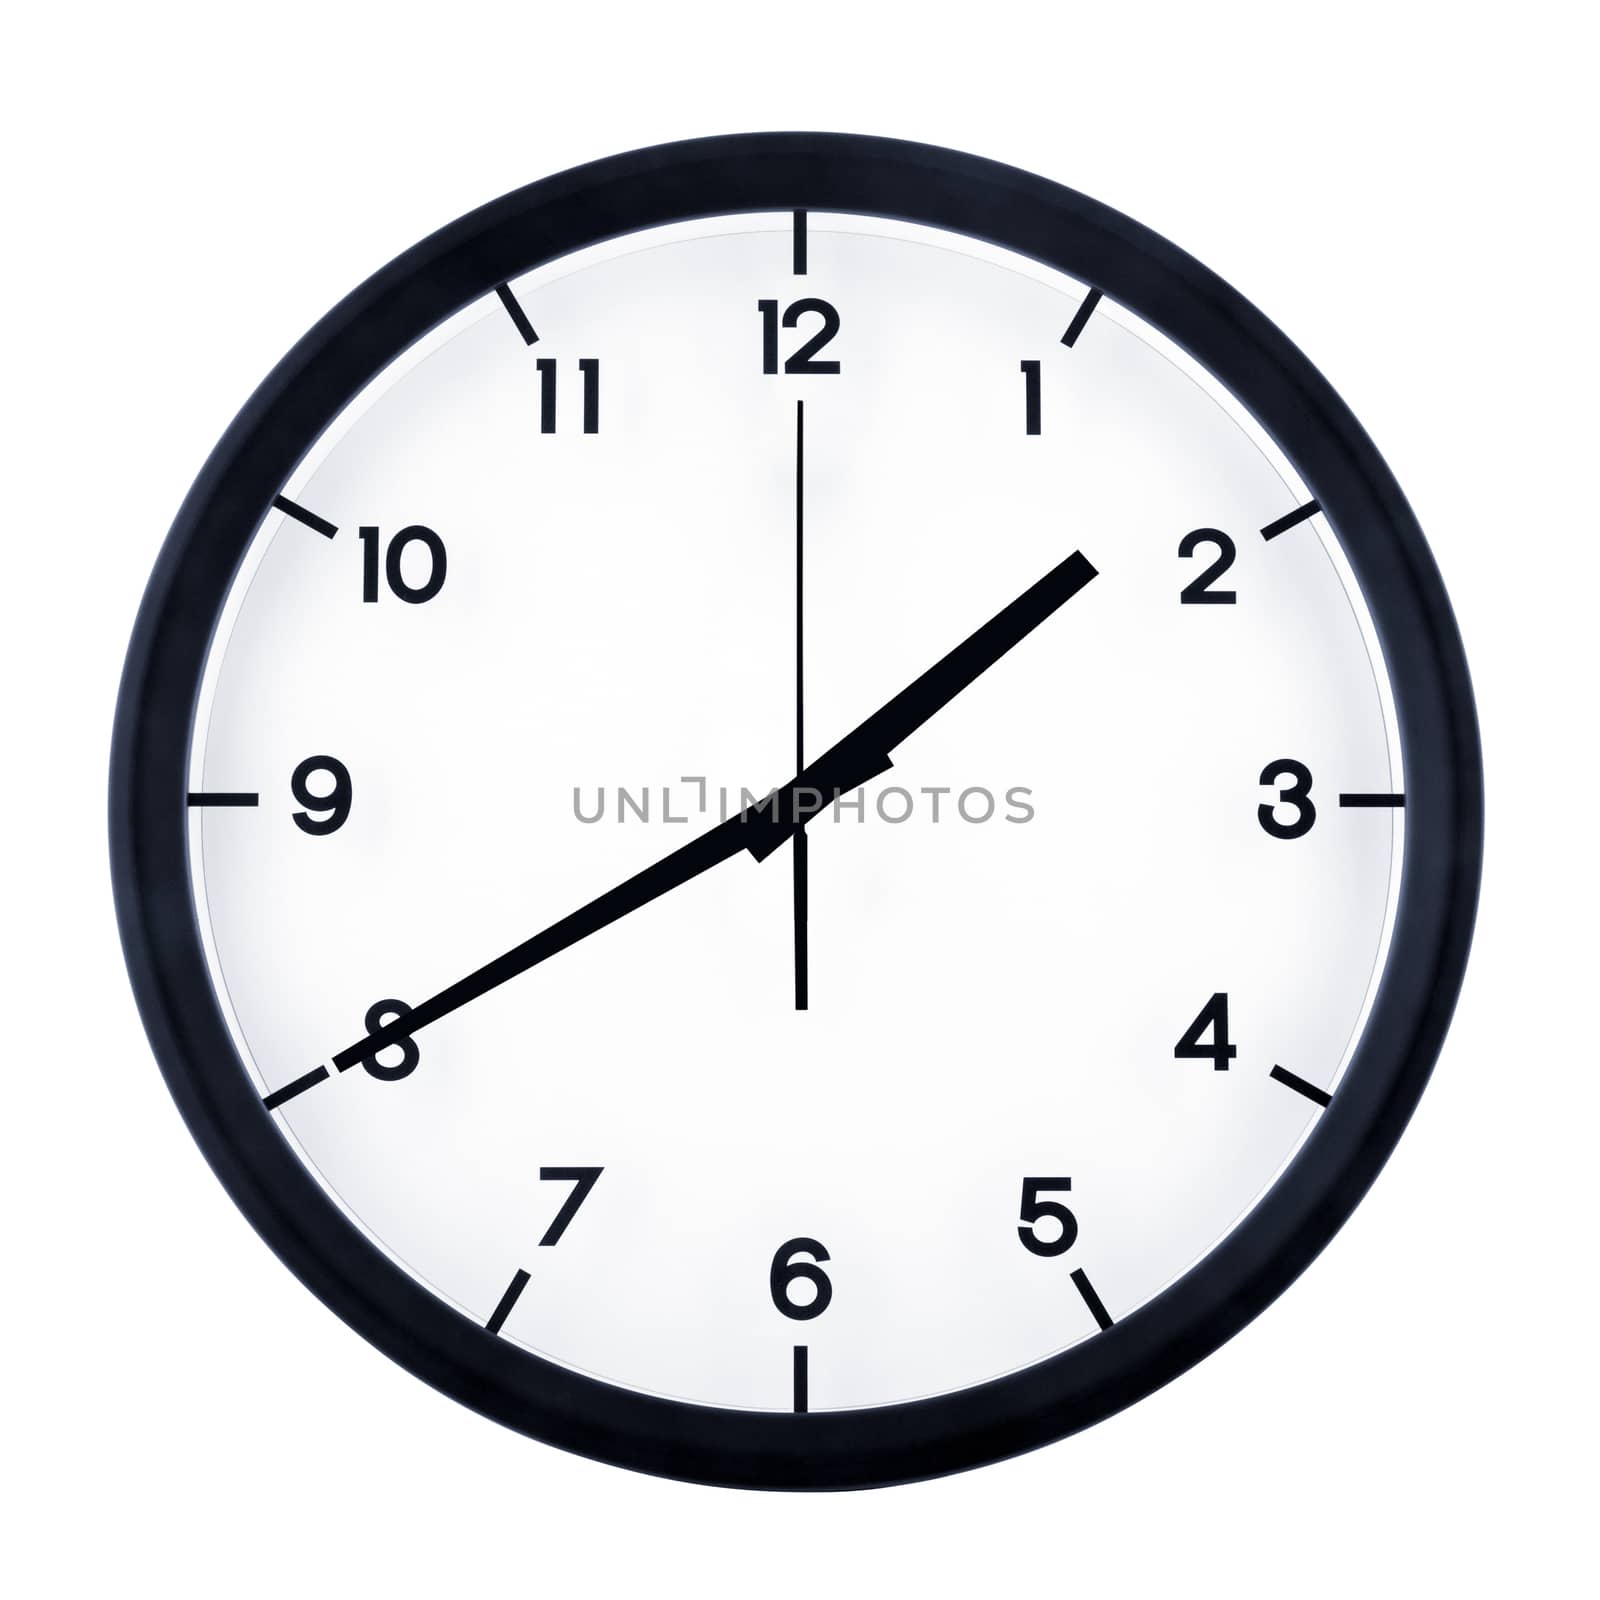 Classic analog clock pointing at one forty, isolated on white background.